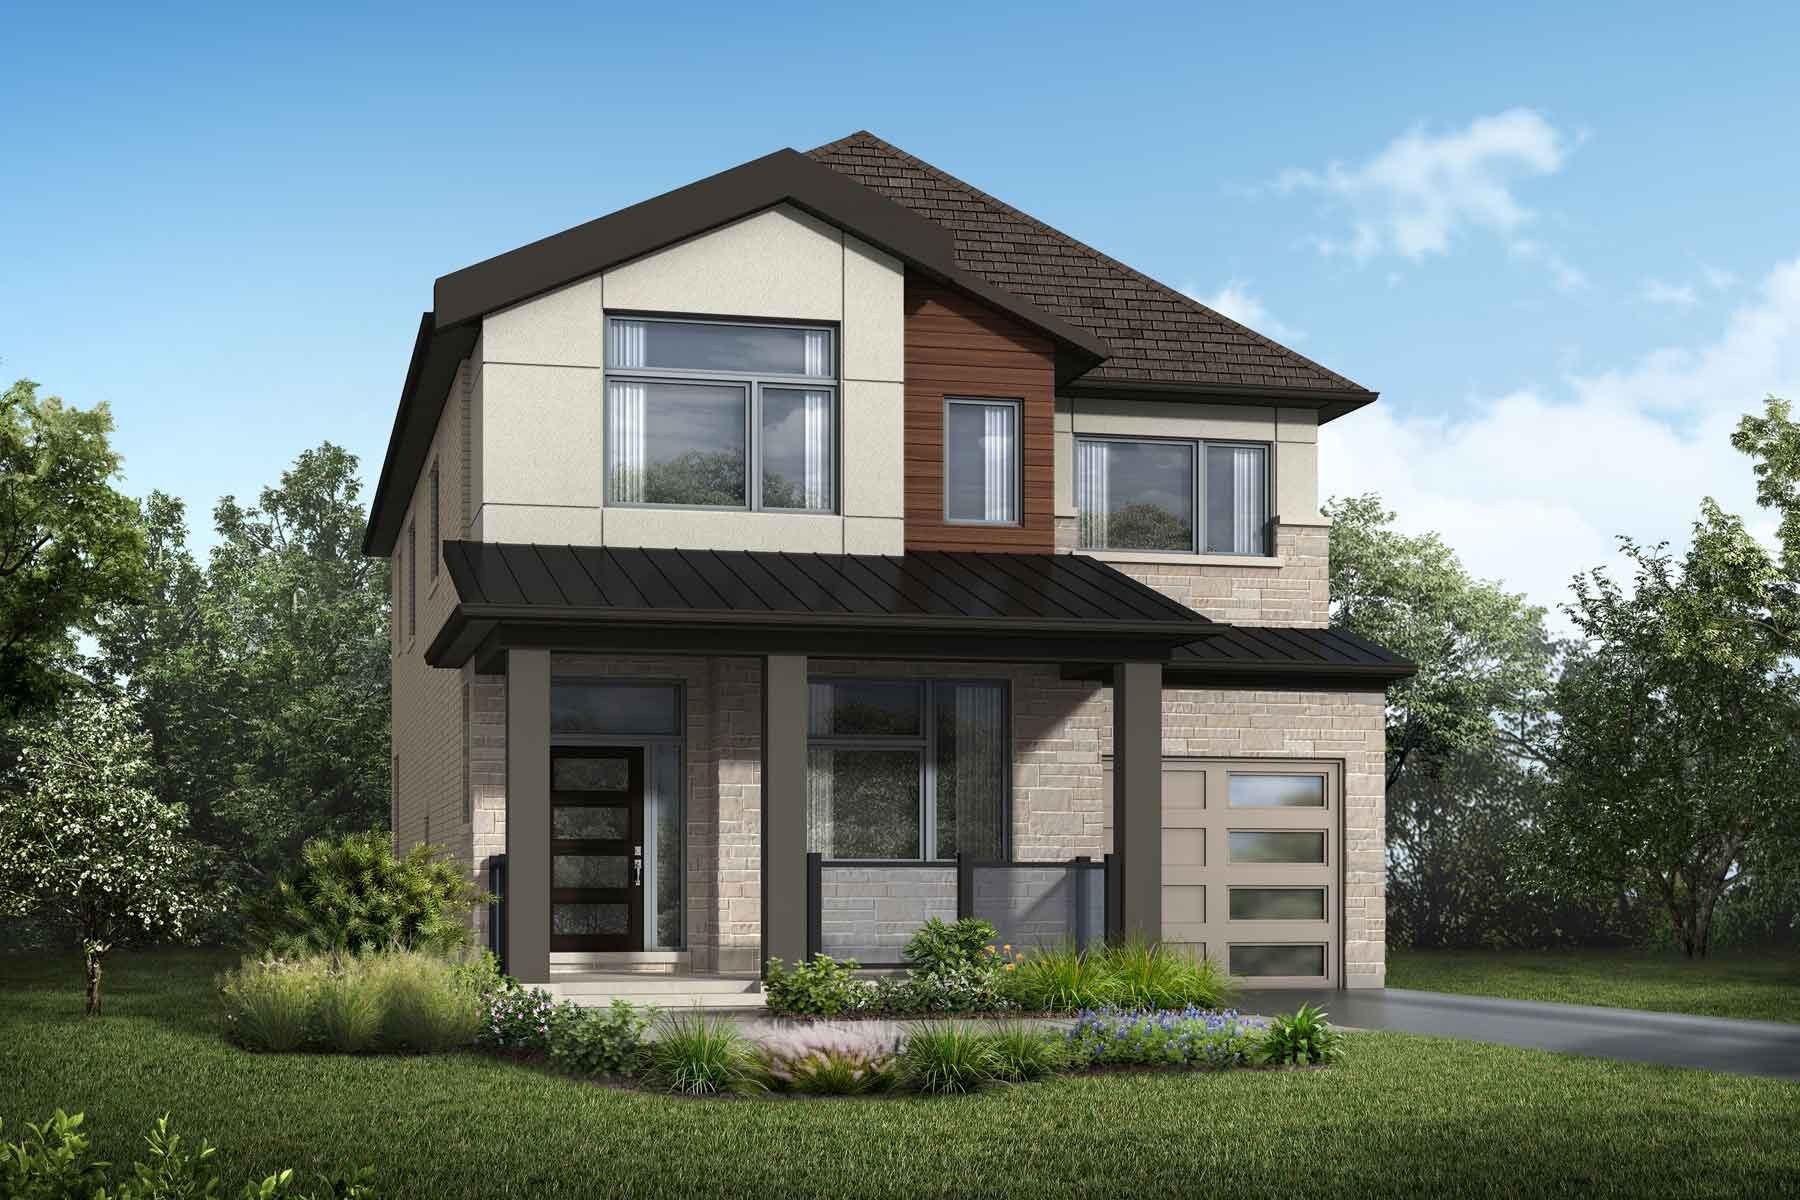 A Contemporary style elevation with a single car garage with windows and covered entrance. 